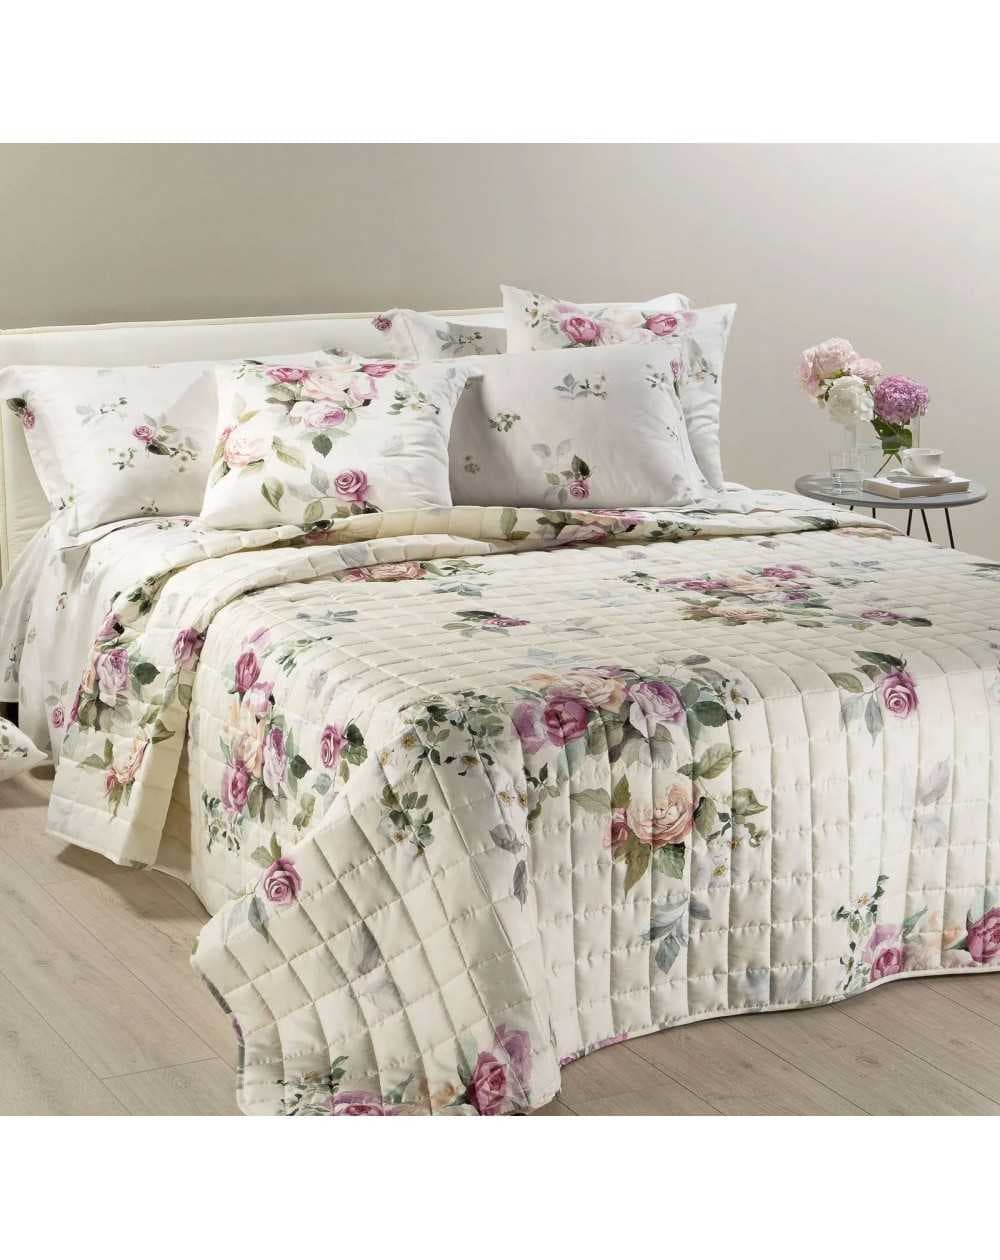 Mid-season quilted bedspread with roses and flowers in cotton satin